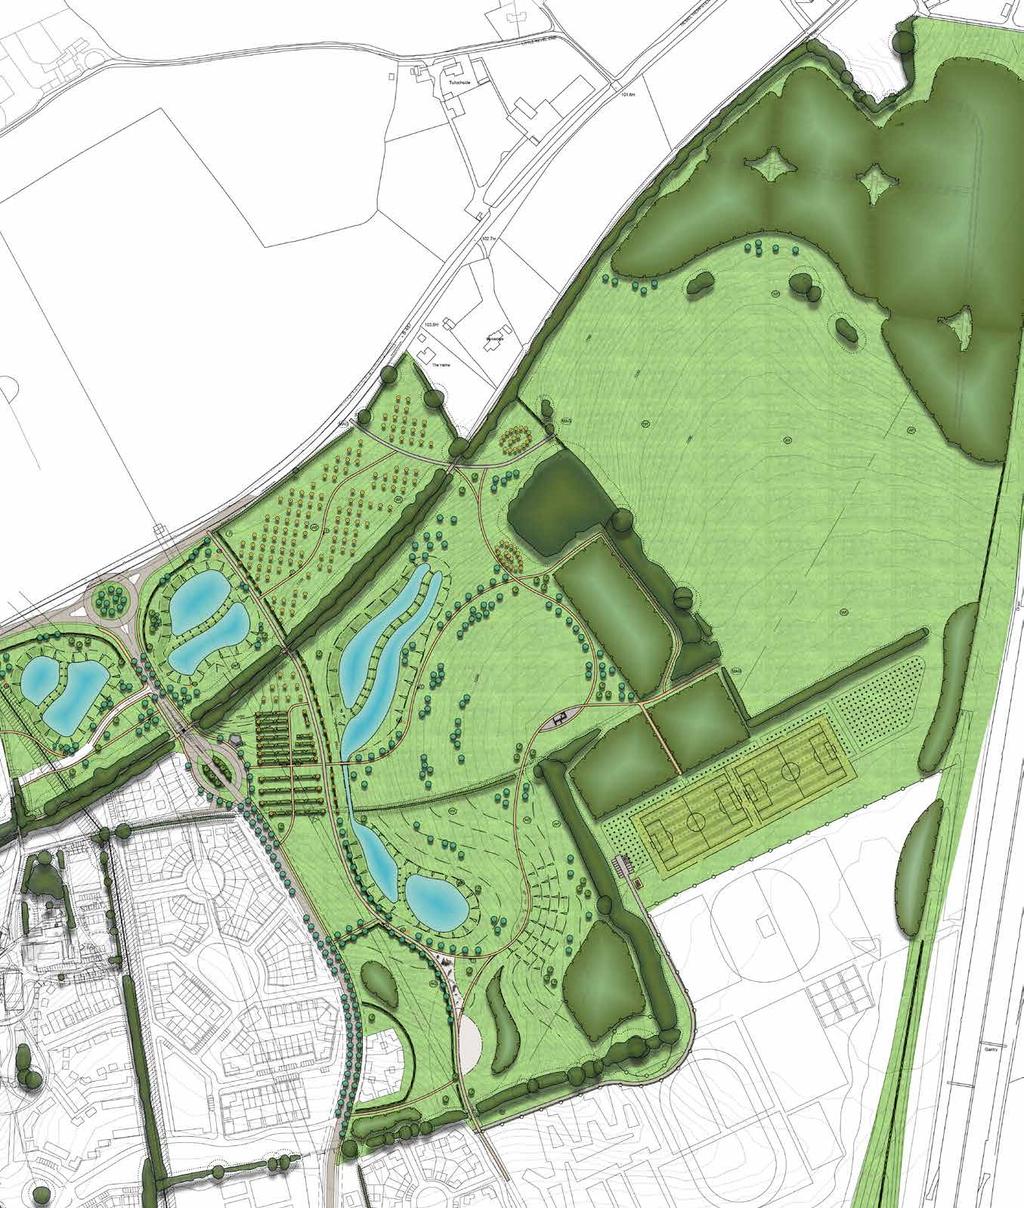 To support this our masterplan will include: More than 30 hectares of green, open space accommodating different recreational uses Structured planting to complement the existing vegetation framework